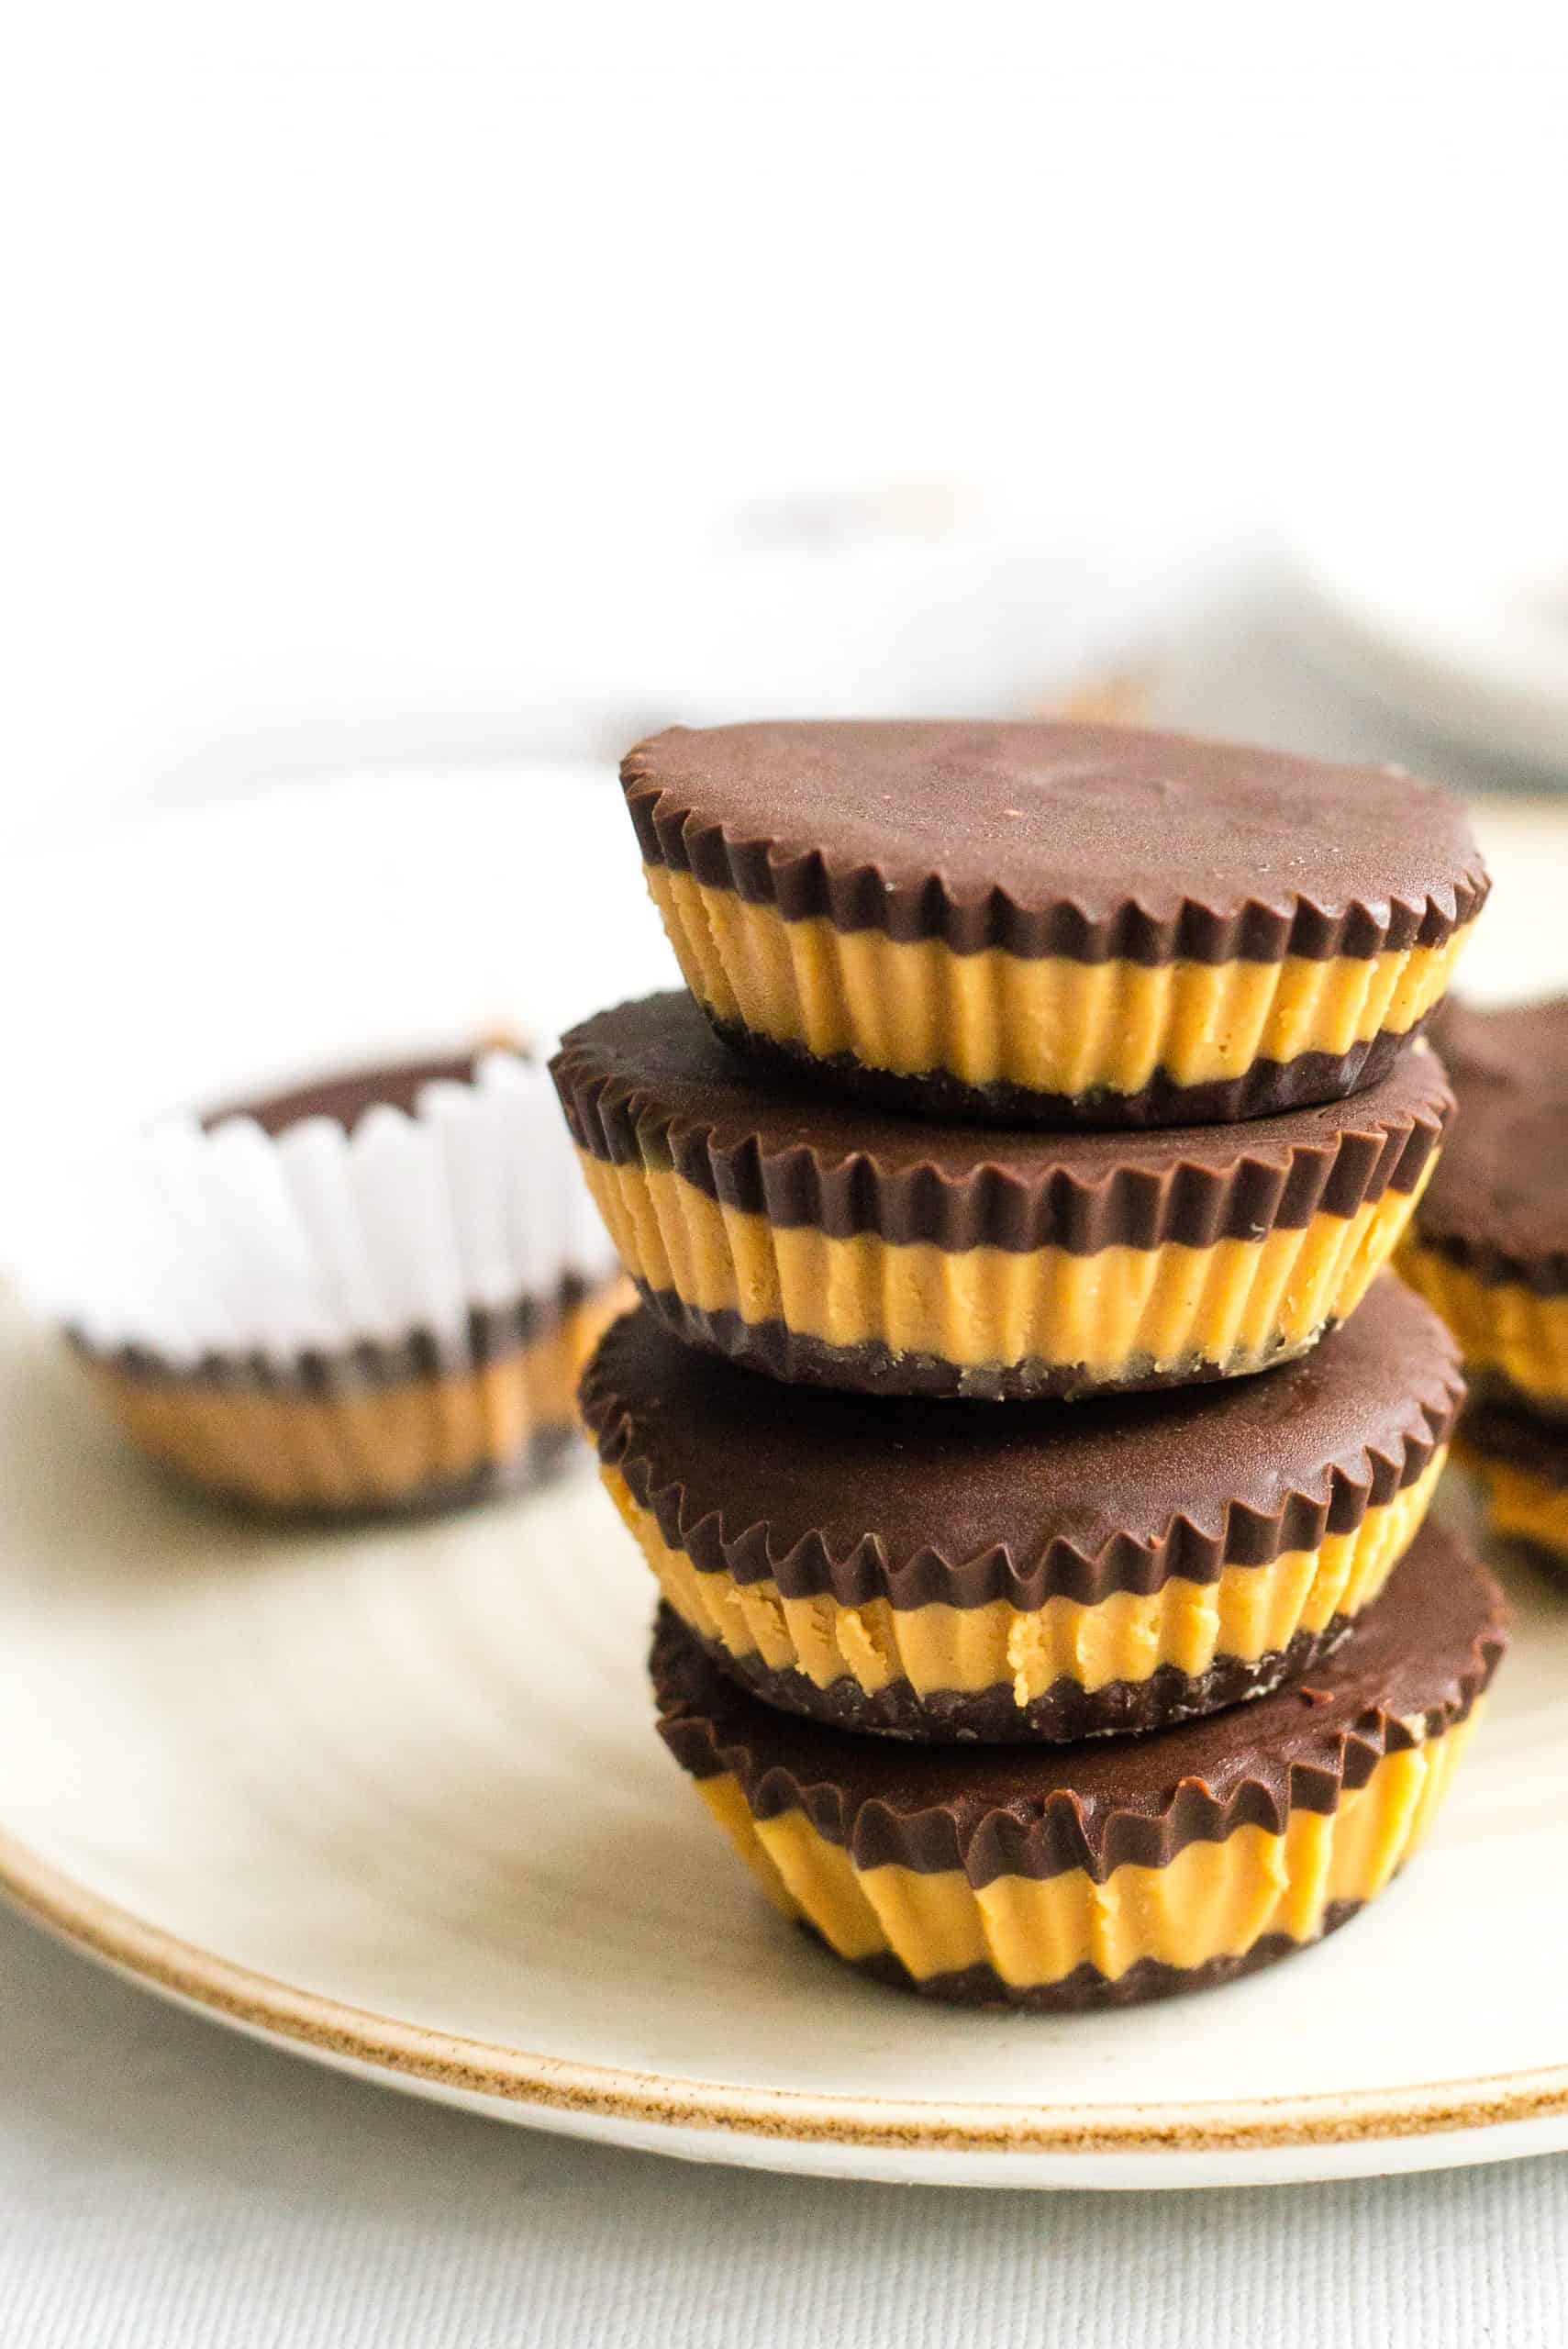 Gluten-free peanut butter cups stacked on a plate.